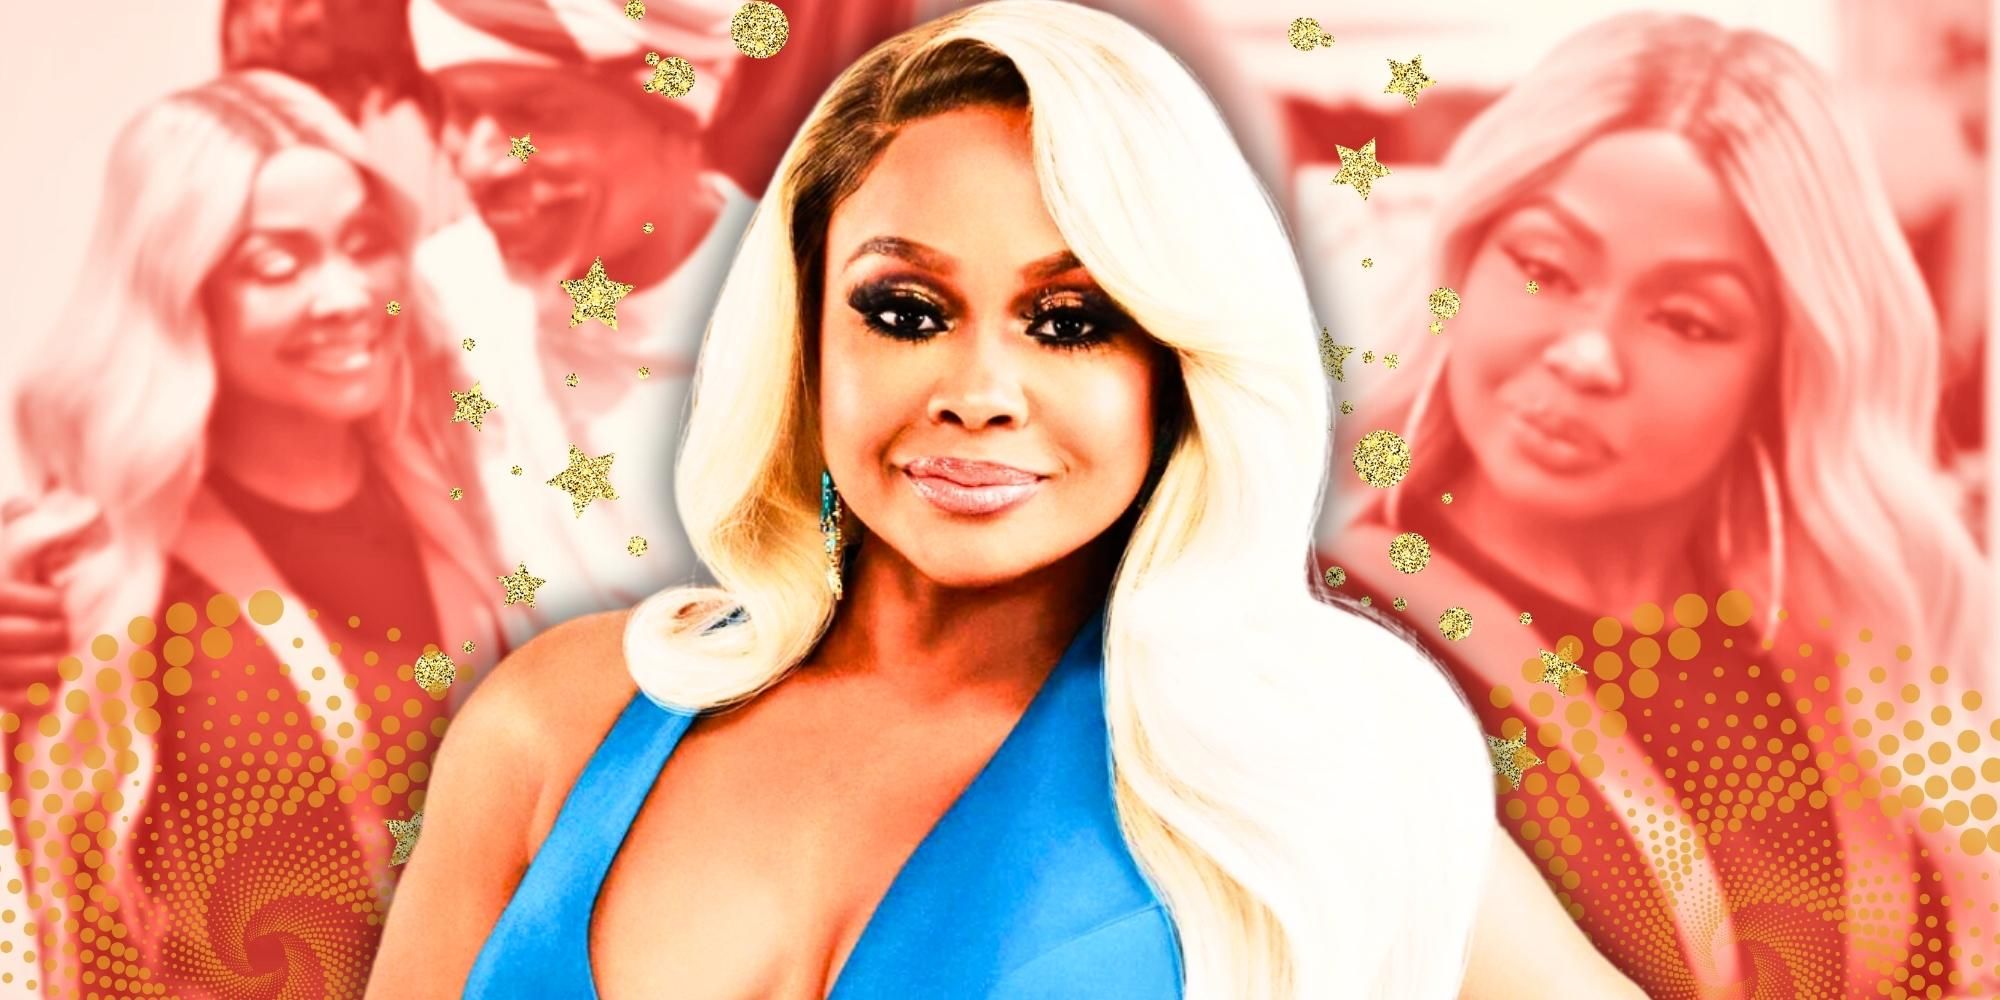 Married To Medicine's Phaedra Parks